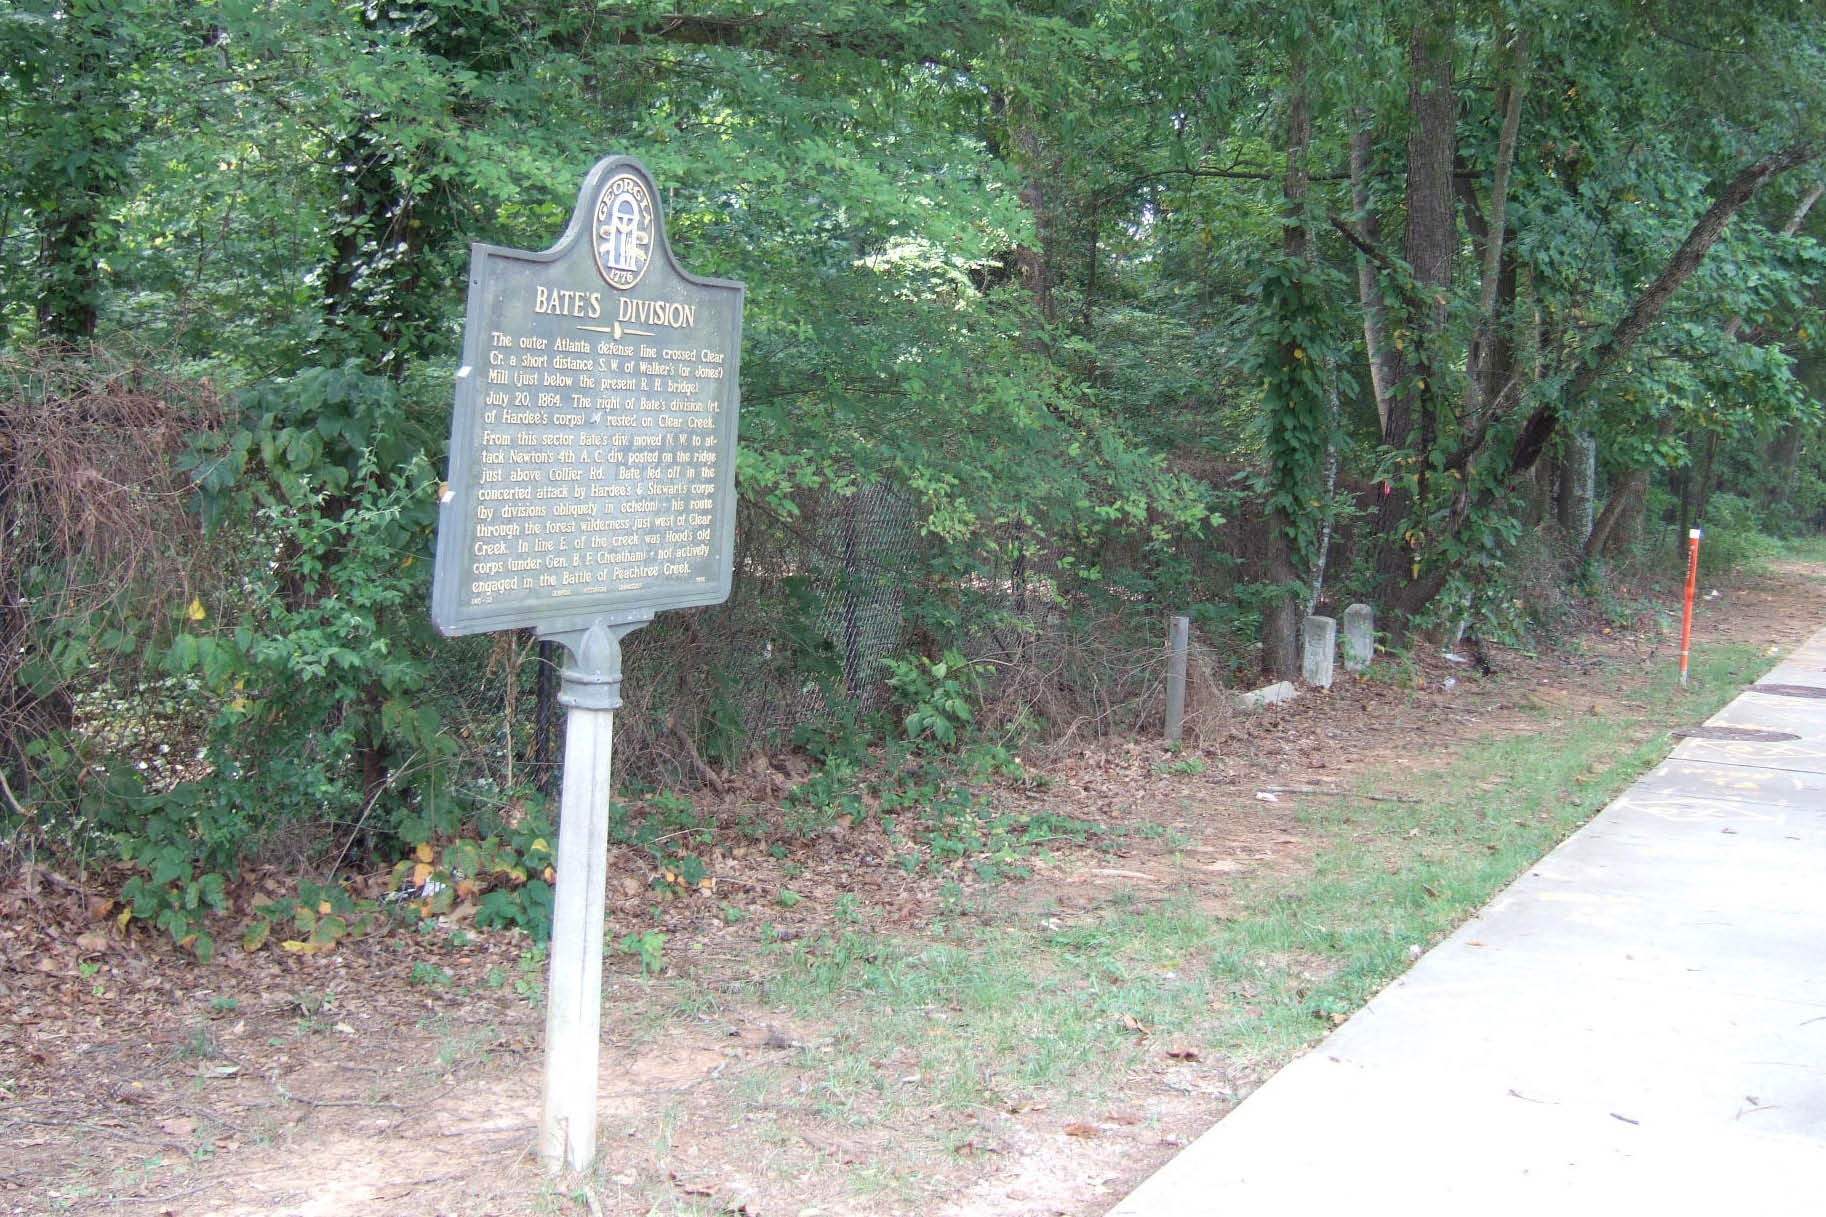 Bate’s Division Marker on Piedmont Road from direction of Westminister Drive